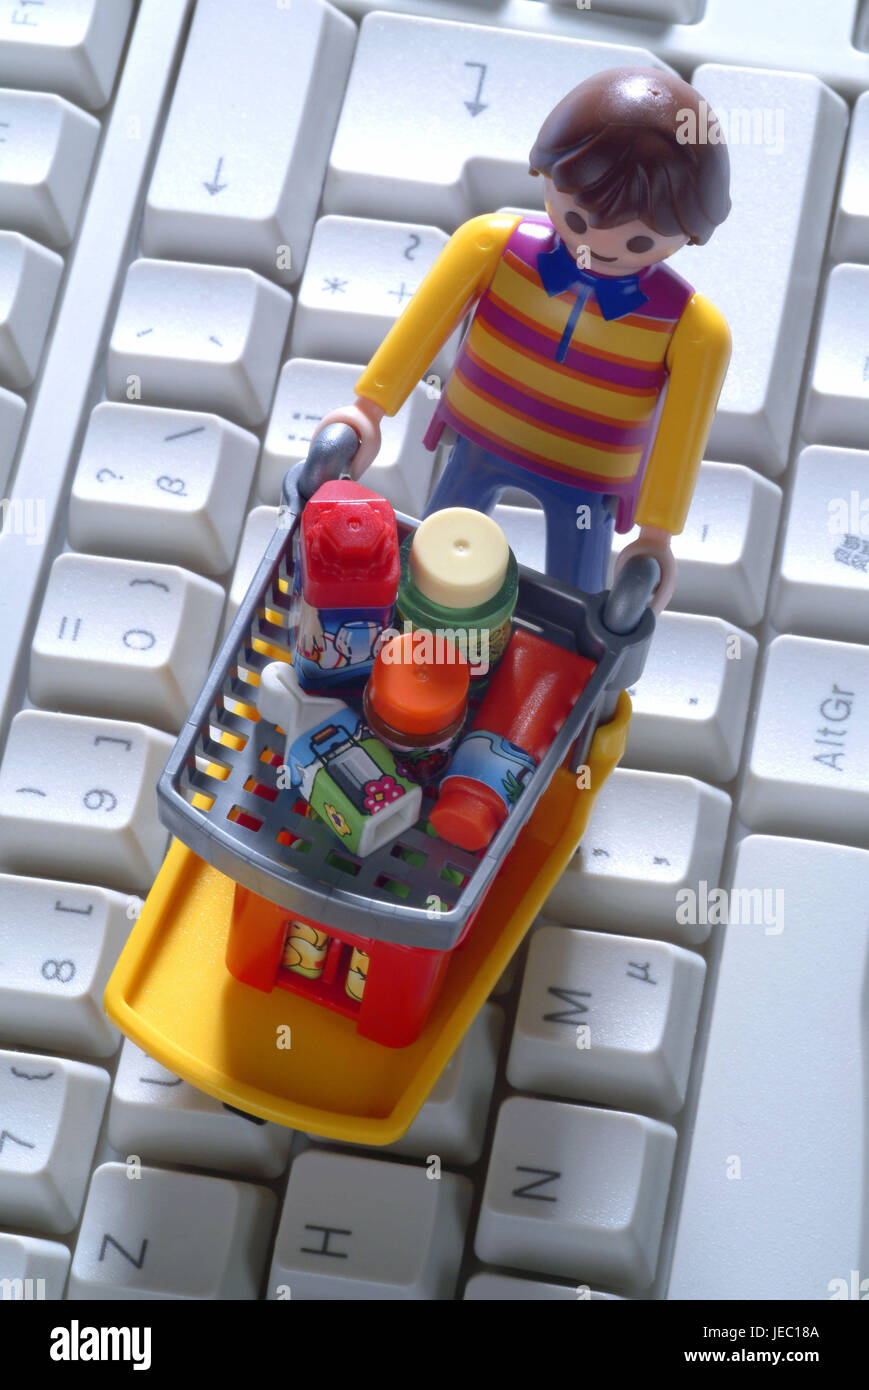 Character by shopping cart on computer keyboard, Stock Photo